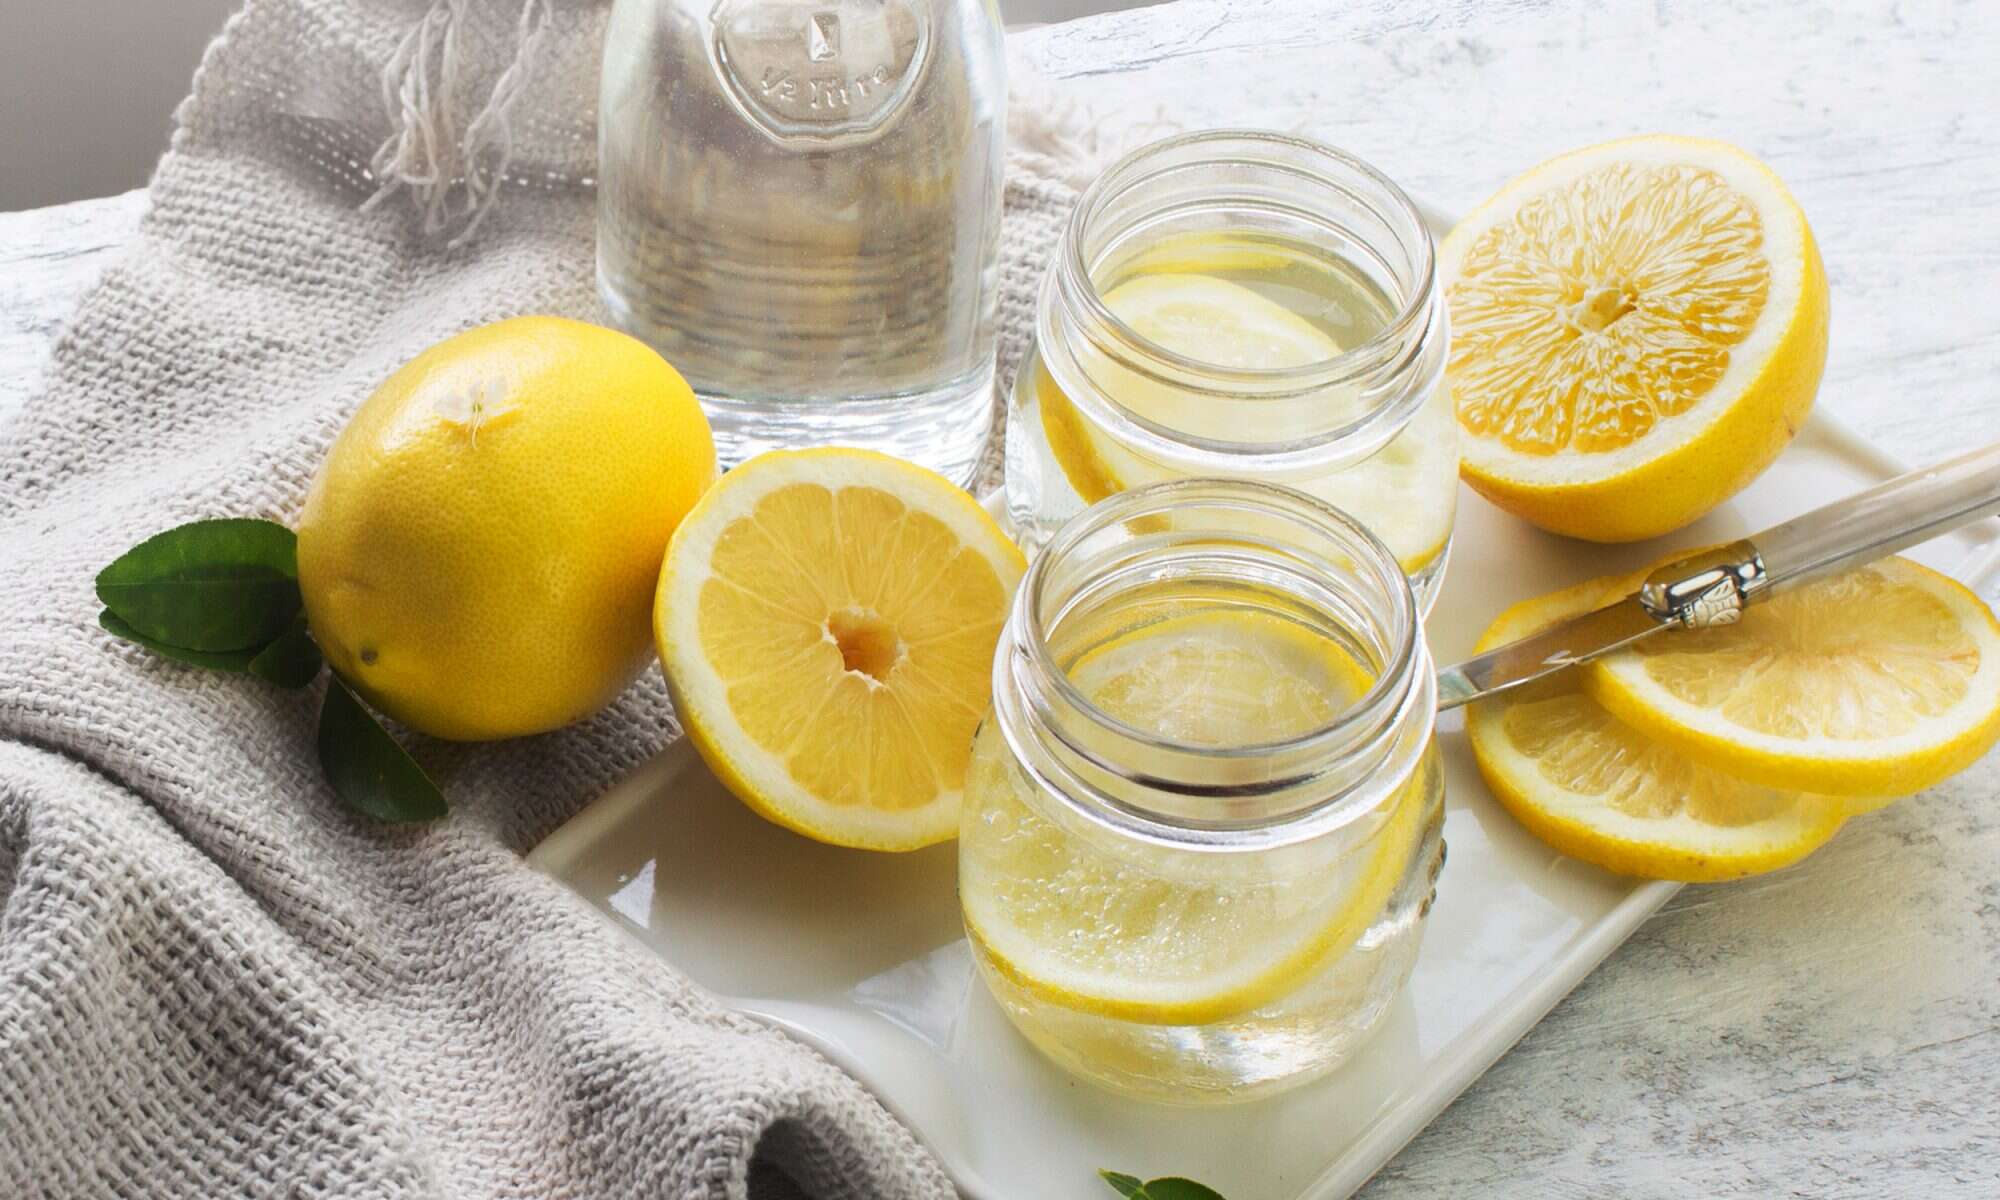 EC: Drinking Water with Lemon in the Morning Is Good for You